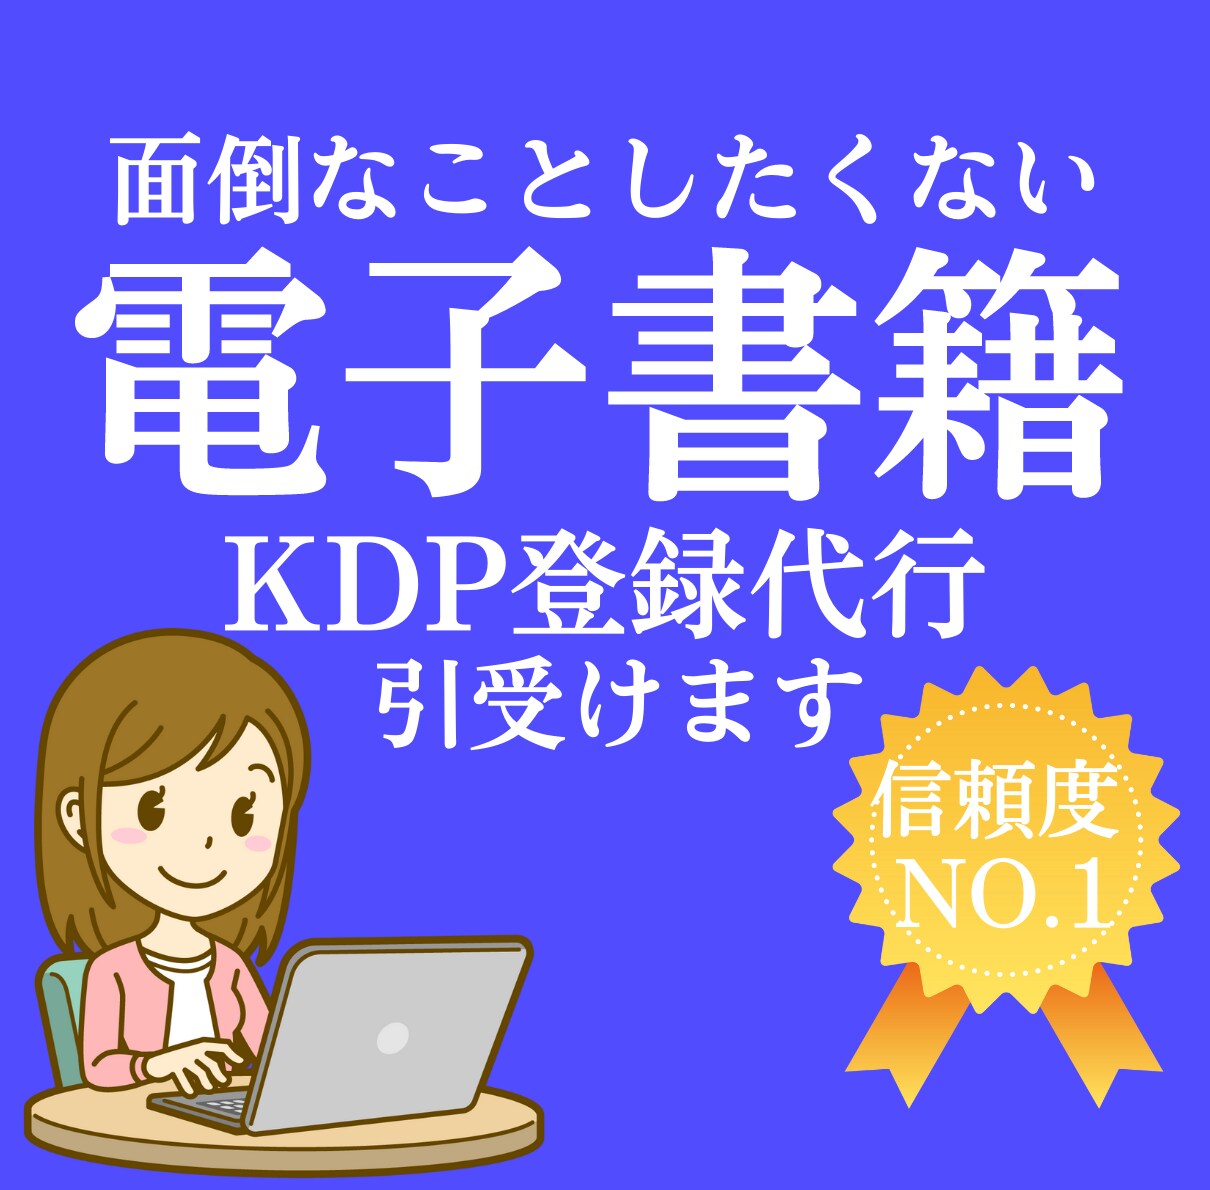 💬Coconala｜We will take care of the troublesome Amazon KDP registration for you COCO★We will help you in your busy schedule 5.0…